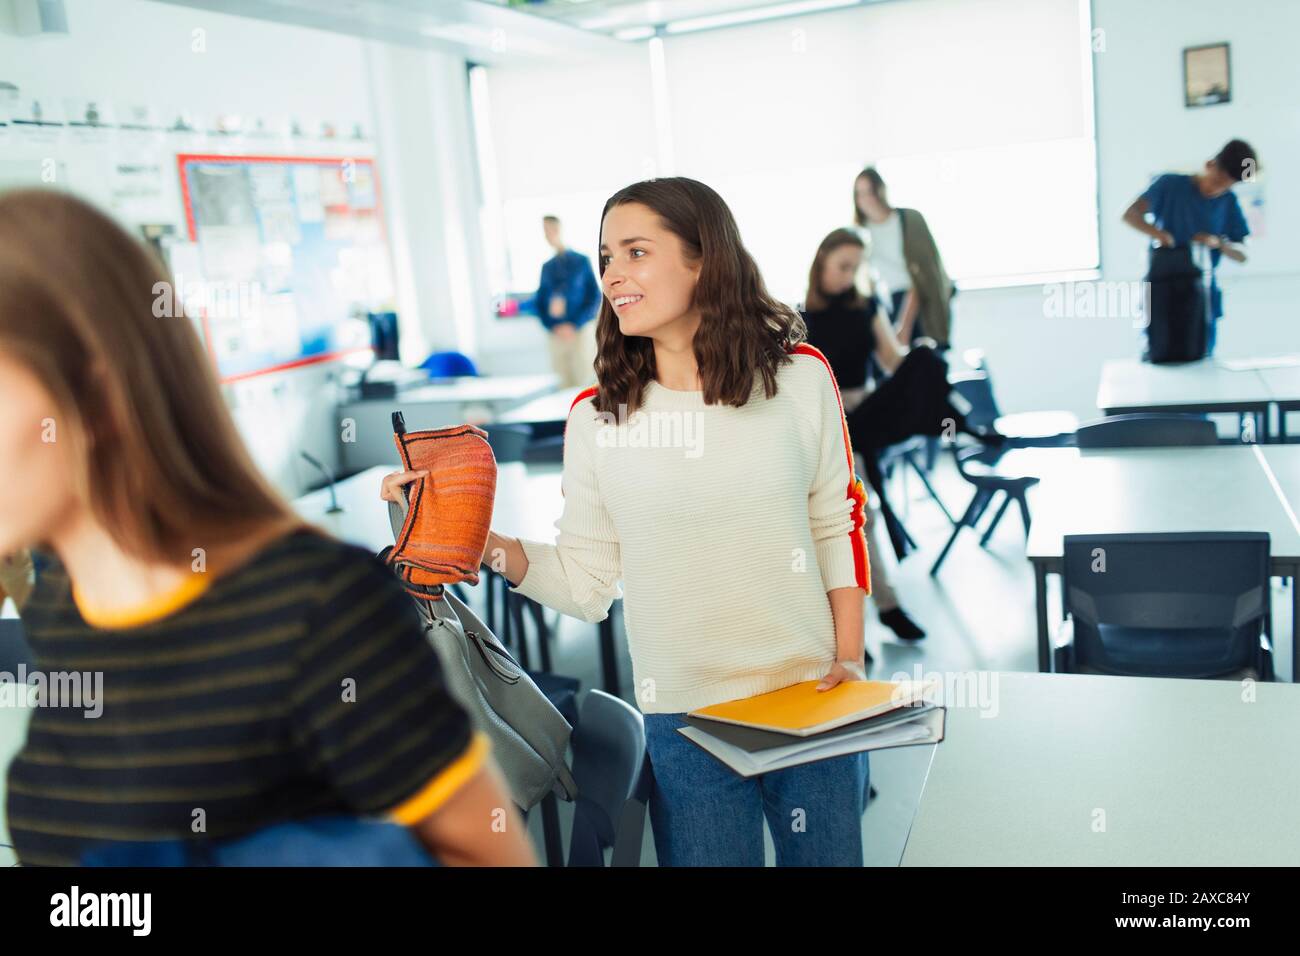 Smiling high school girl student leaving classroom Stock Photo